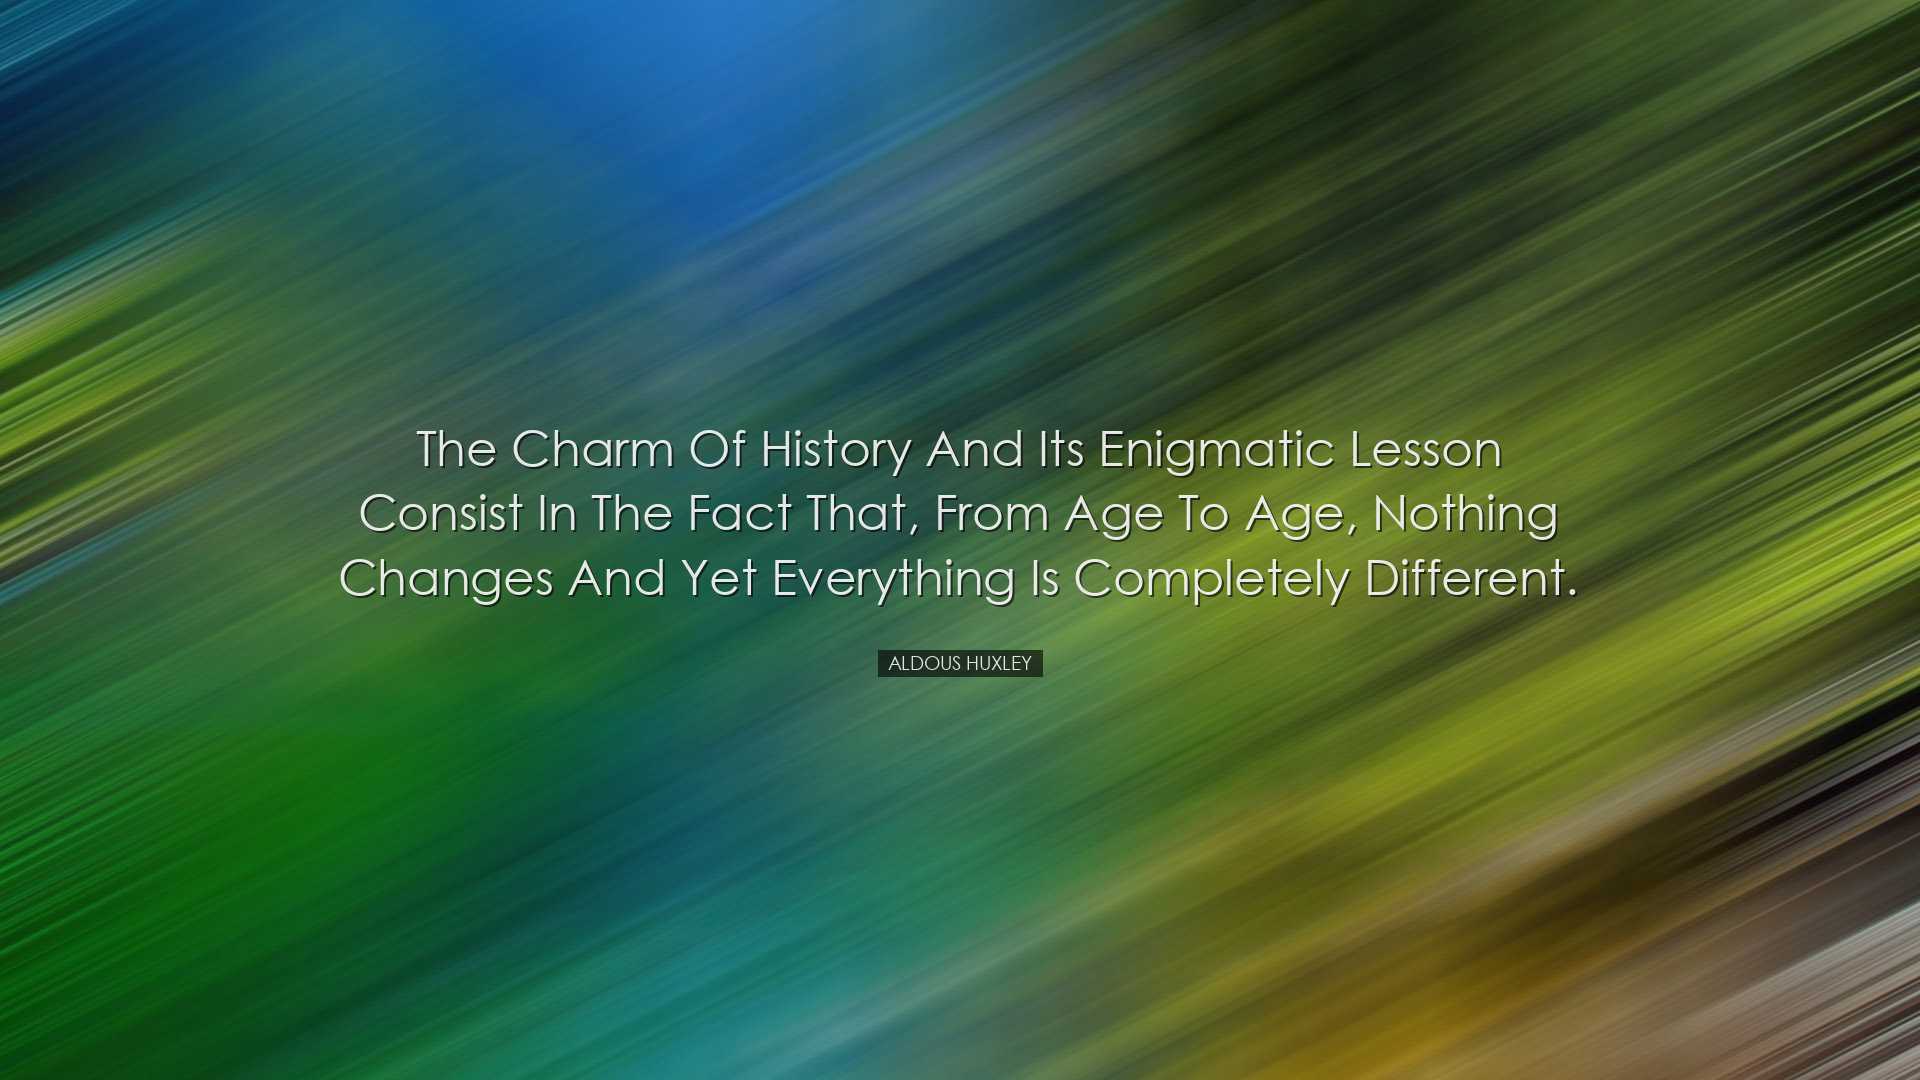 The charm of history and its enigmatic lesson consist in the fact